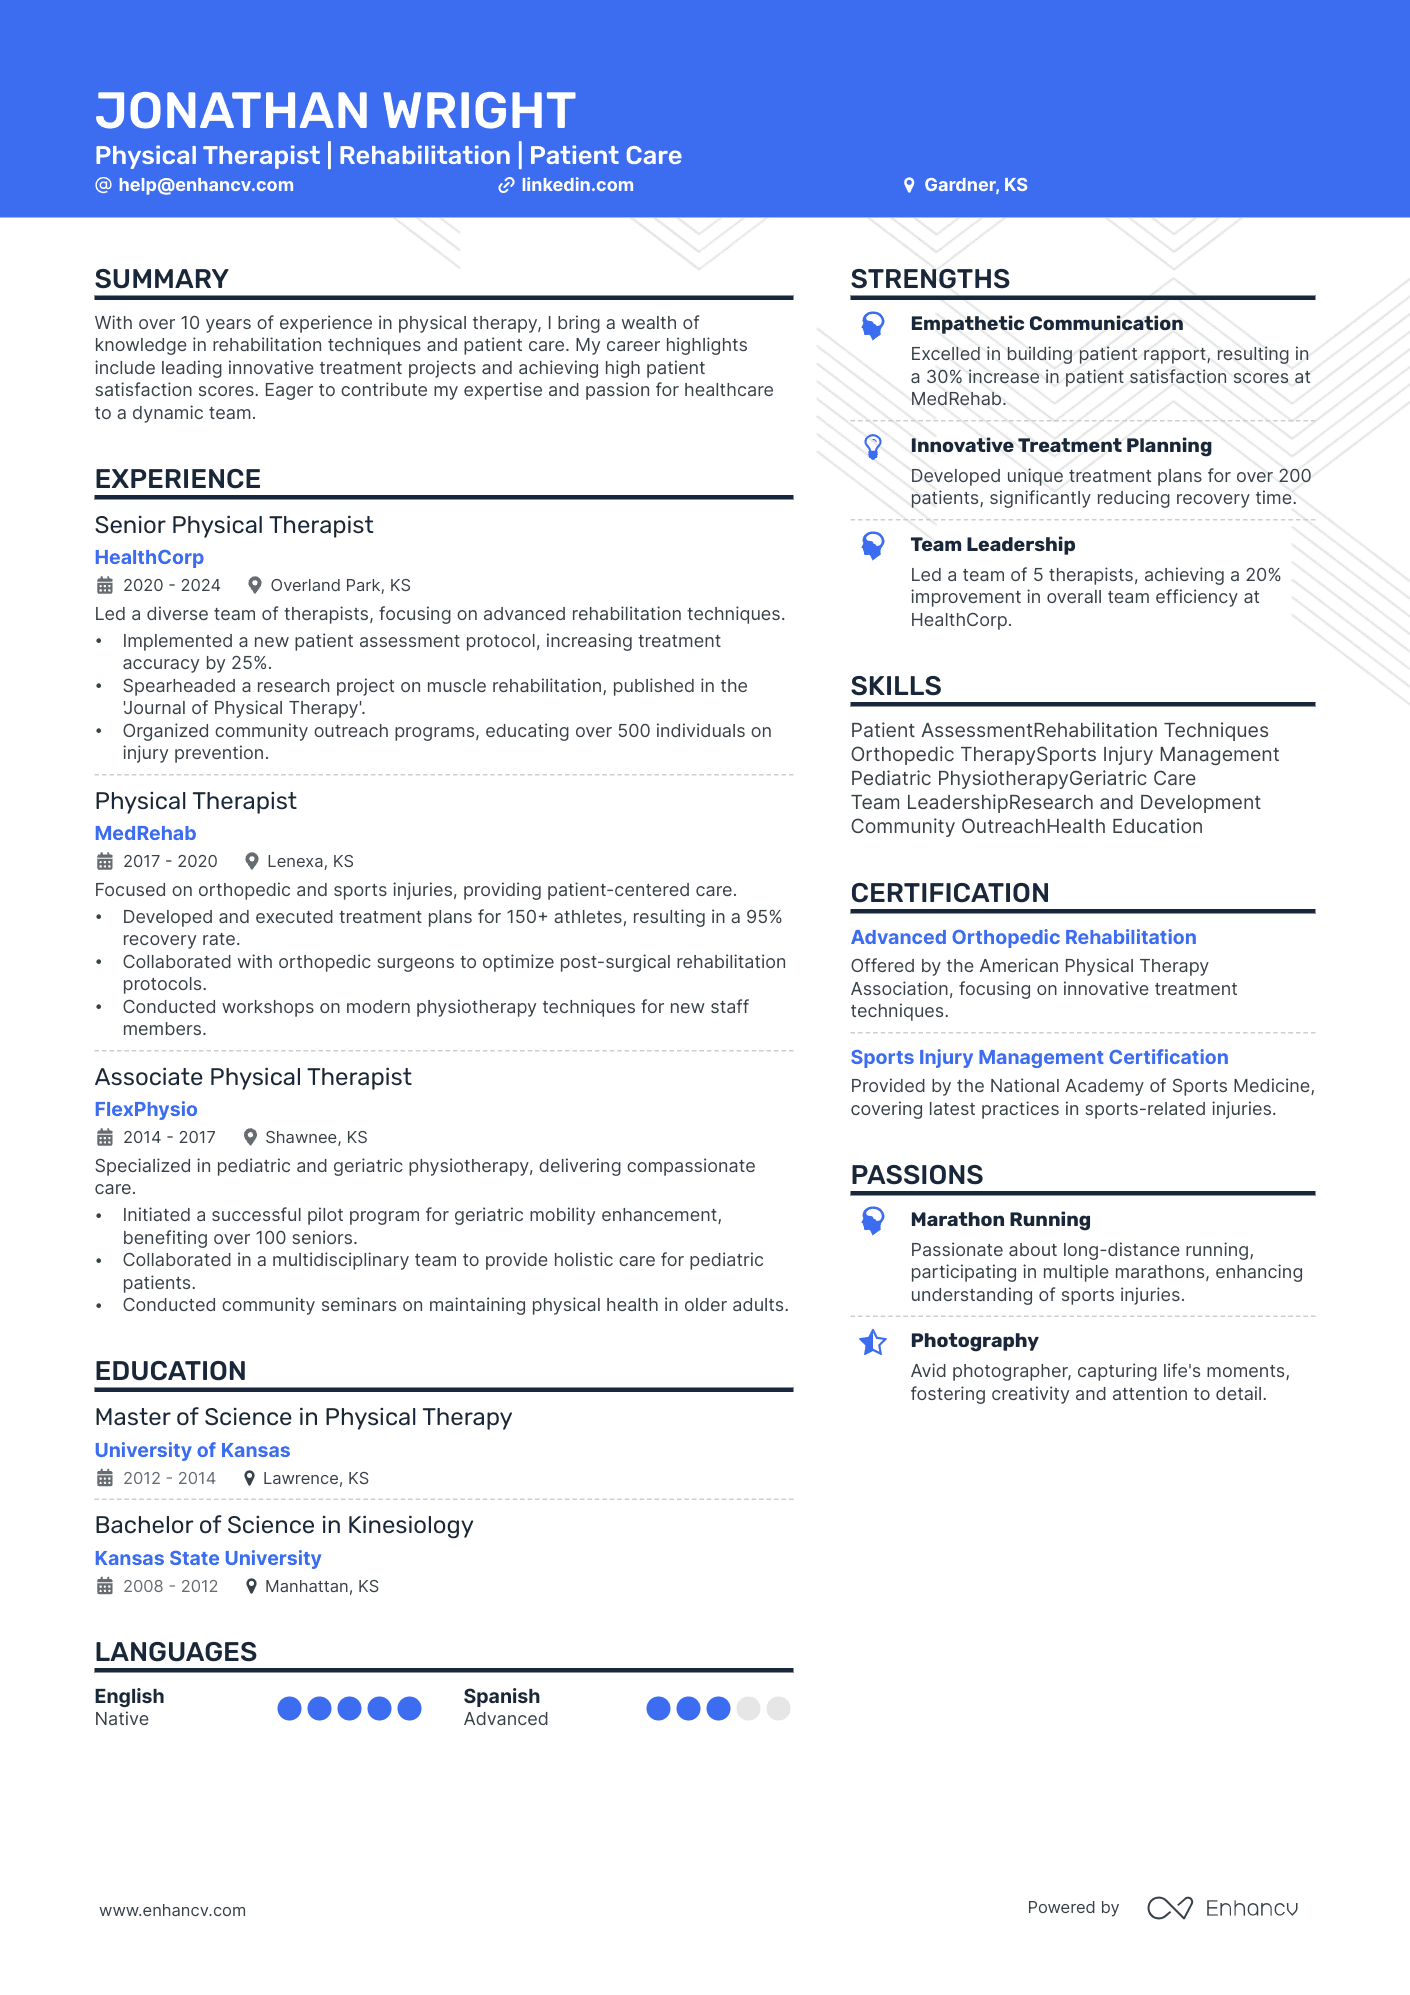 Physical Therapist | Rehabilitation | Patient Care resume example